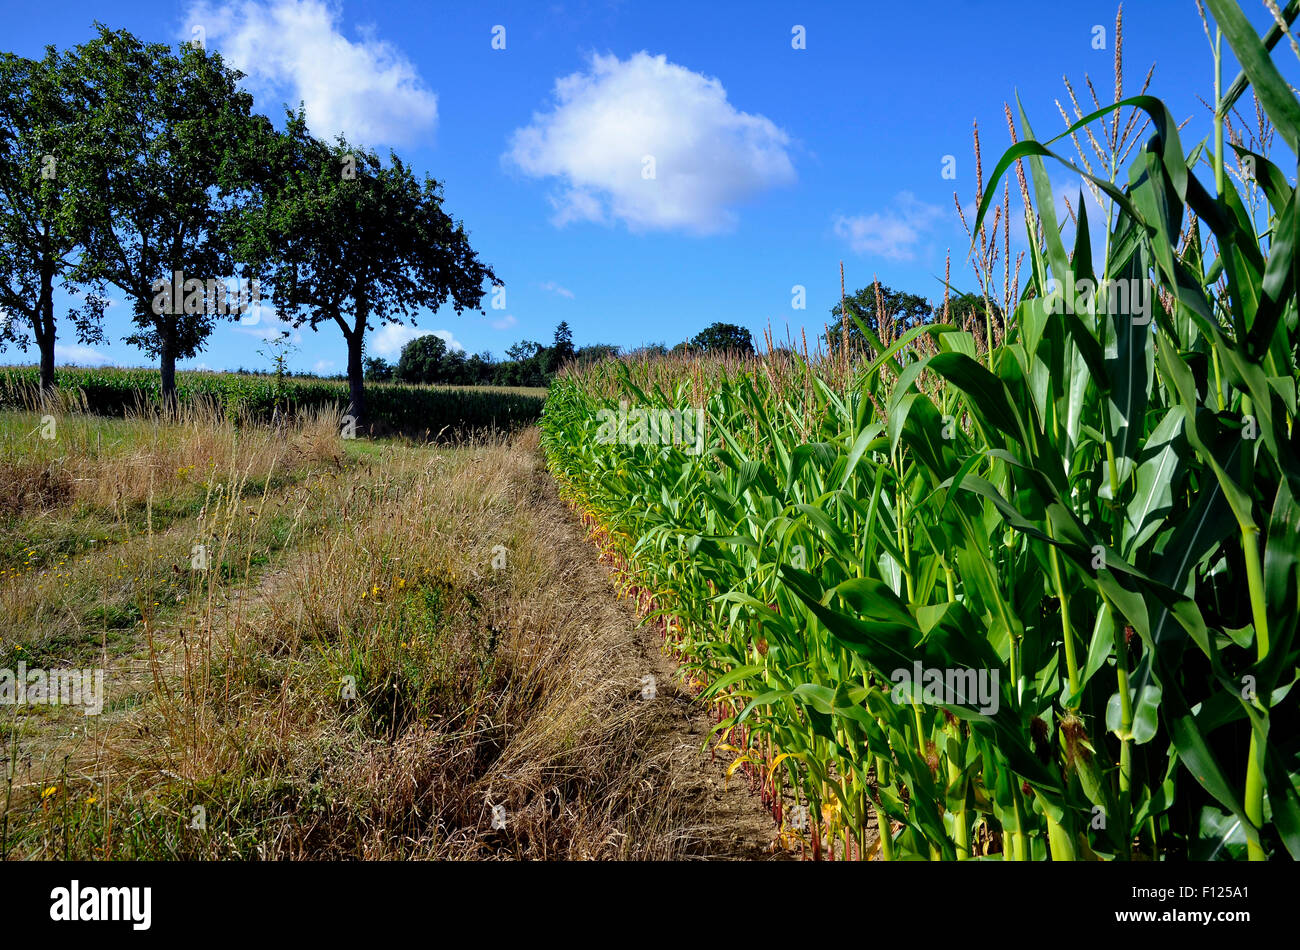 A field of maize (corn) in Basse Normandie (southern Normandy), France. Much of the crop is used as cattle feed. Stock Photo